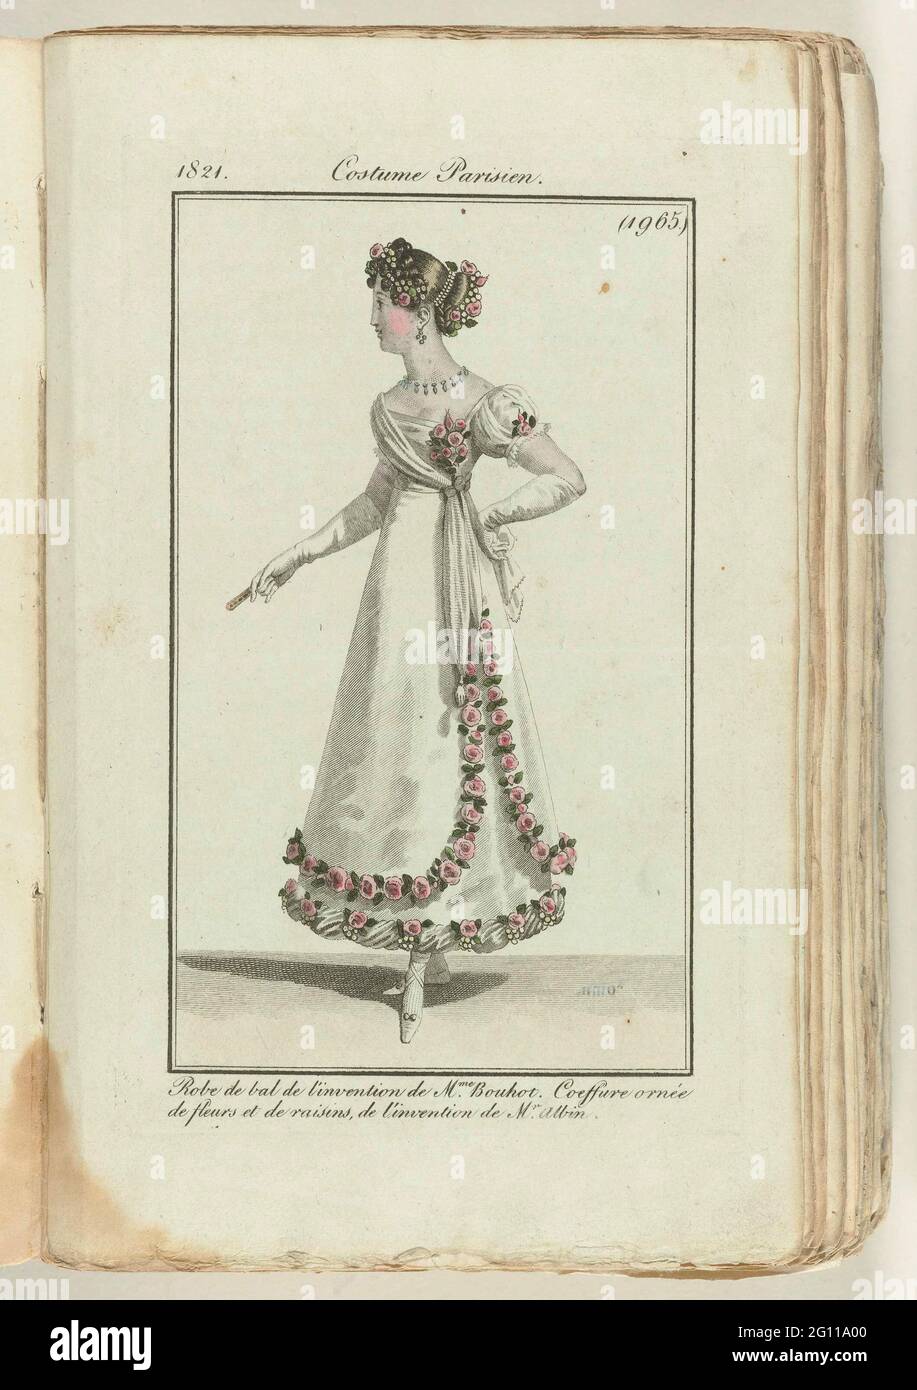 Ladies' diary and modes 1821, Parisian costume (1965). Ball dress of the  invention of Ms Bouhot. Prant UIT Het Tijdschrift Journal des Dames and  Modes, 1821 Stock Photo - Alamy